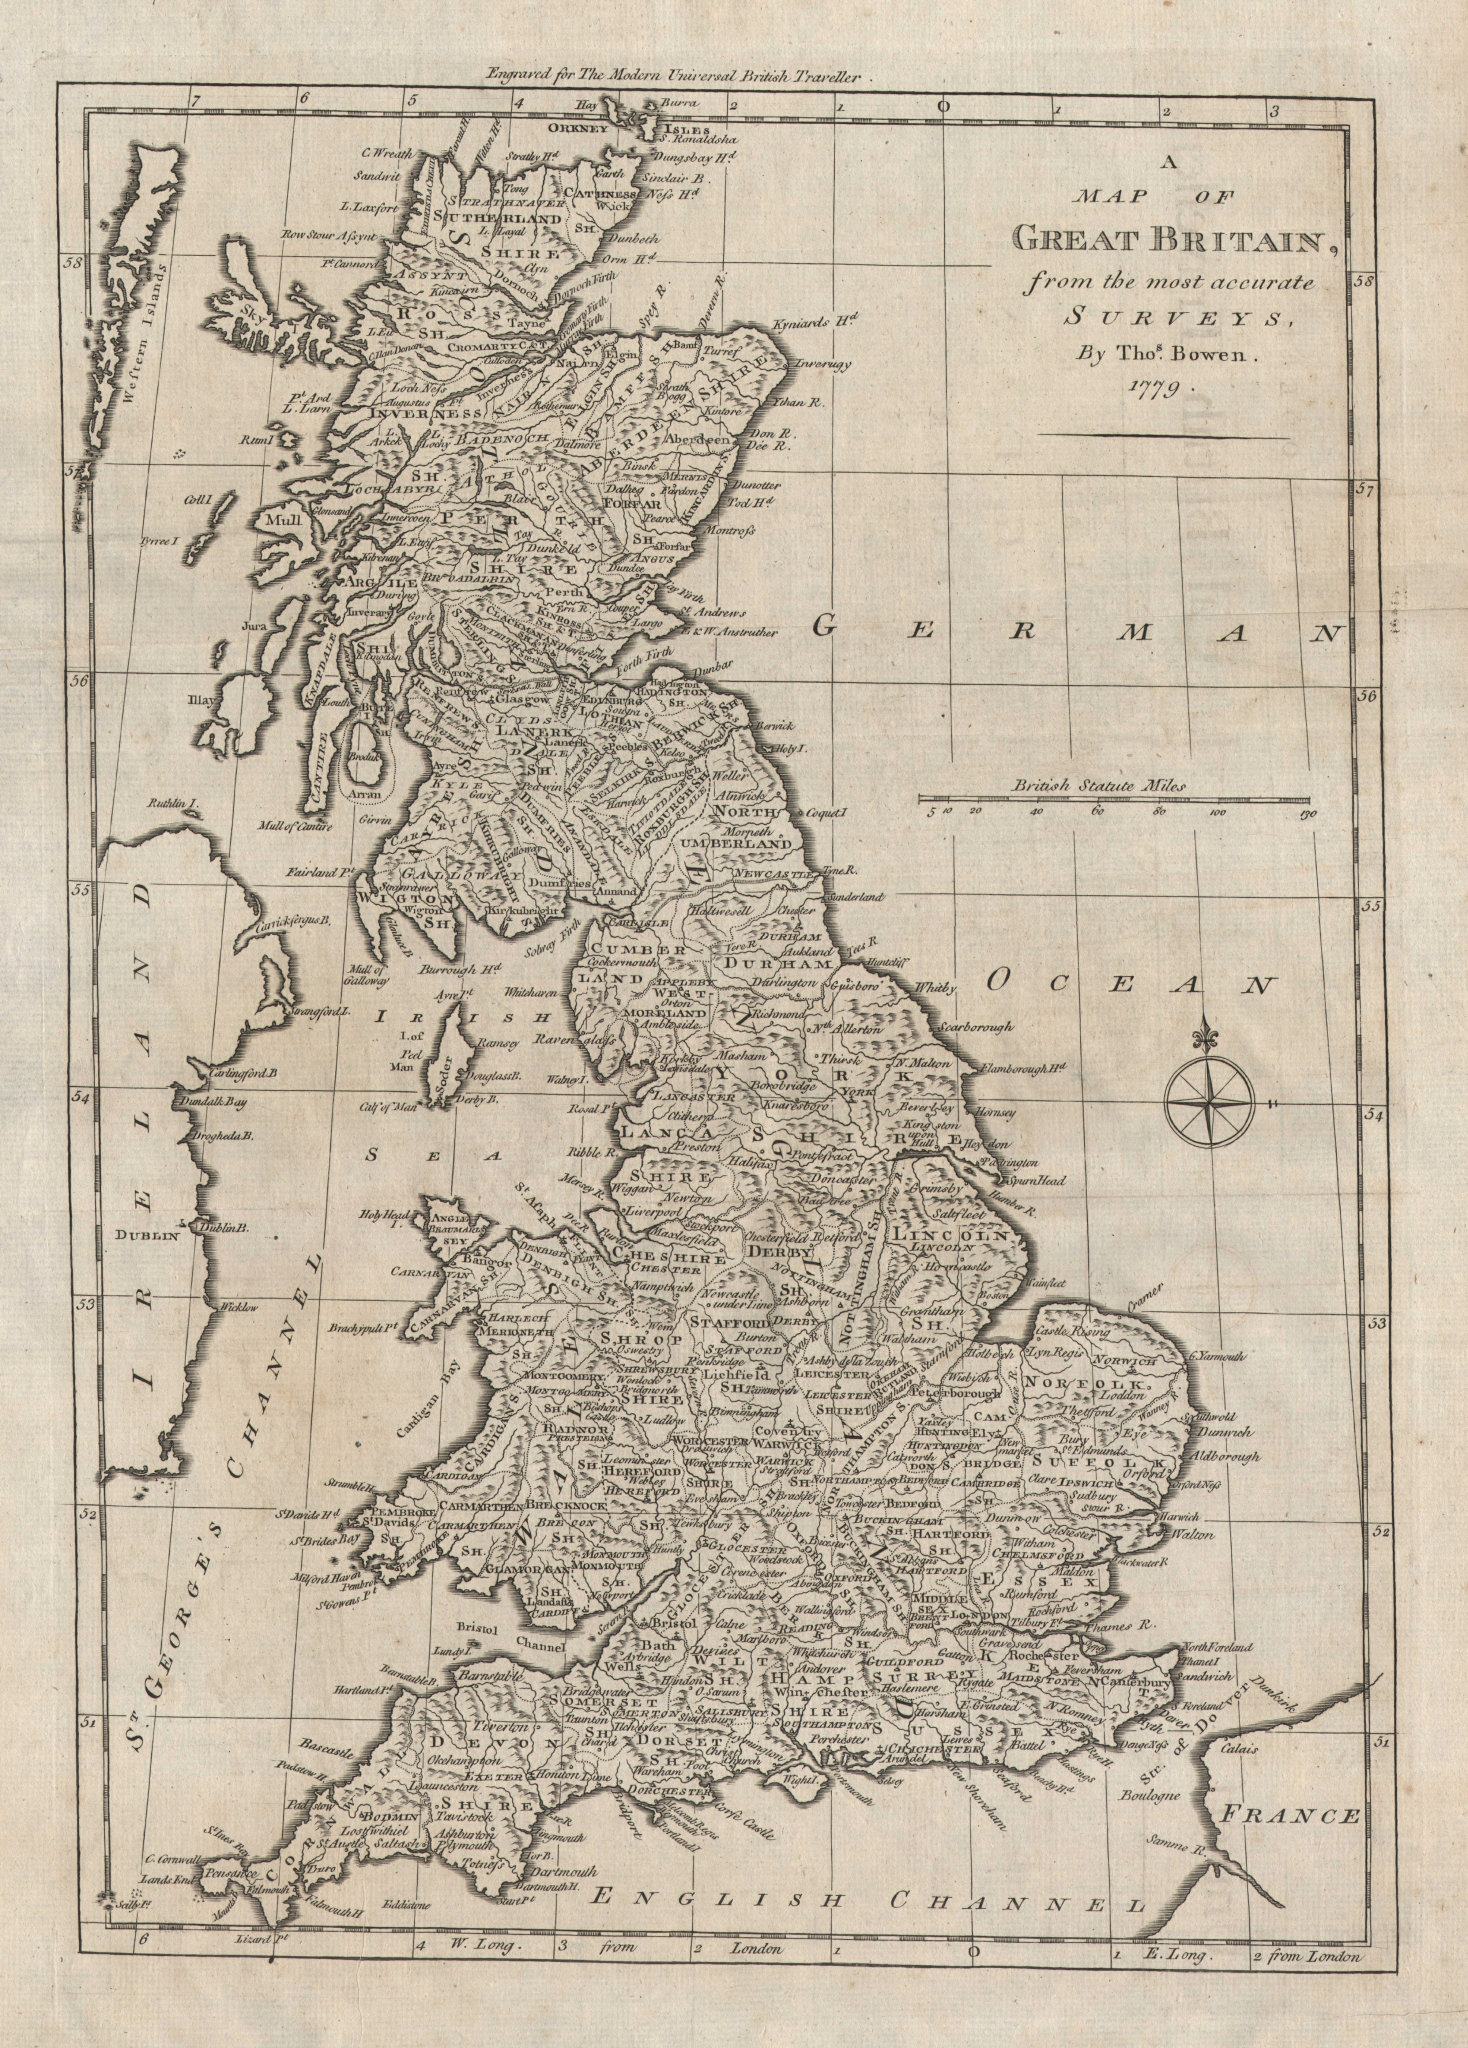 A map of Great Britain from the most accurate surveys, by Thomas BOWEN 1779